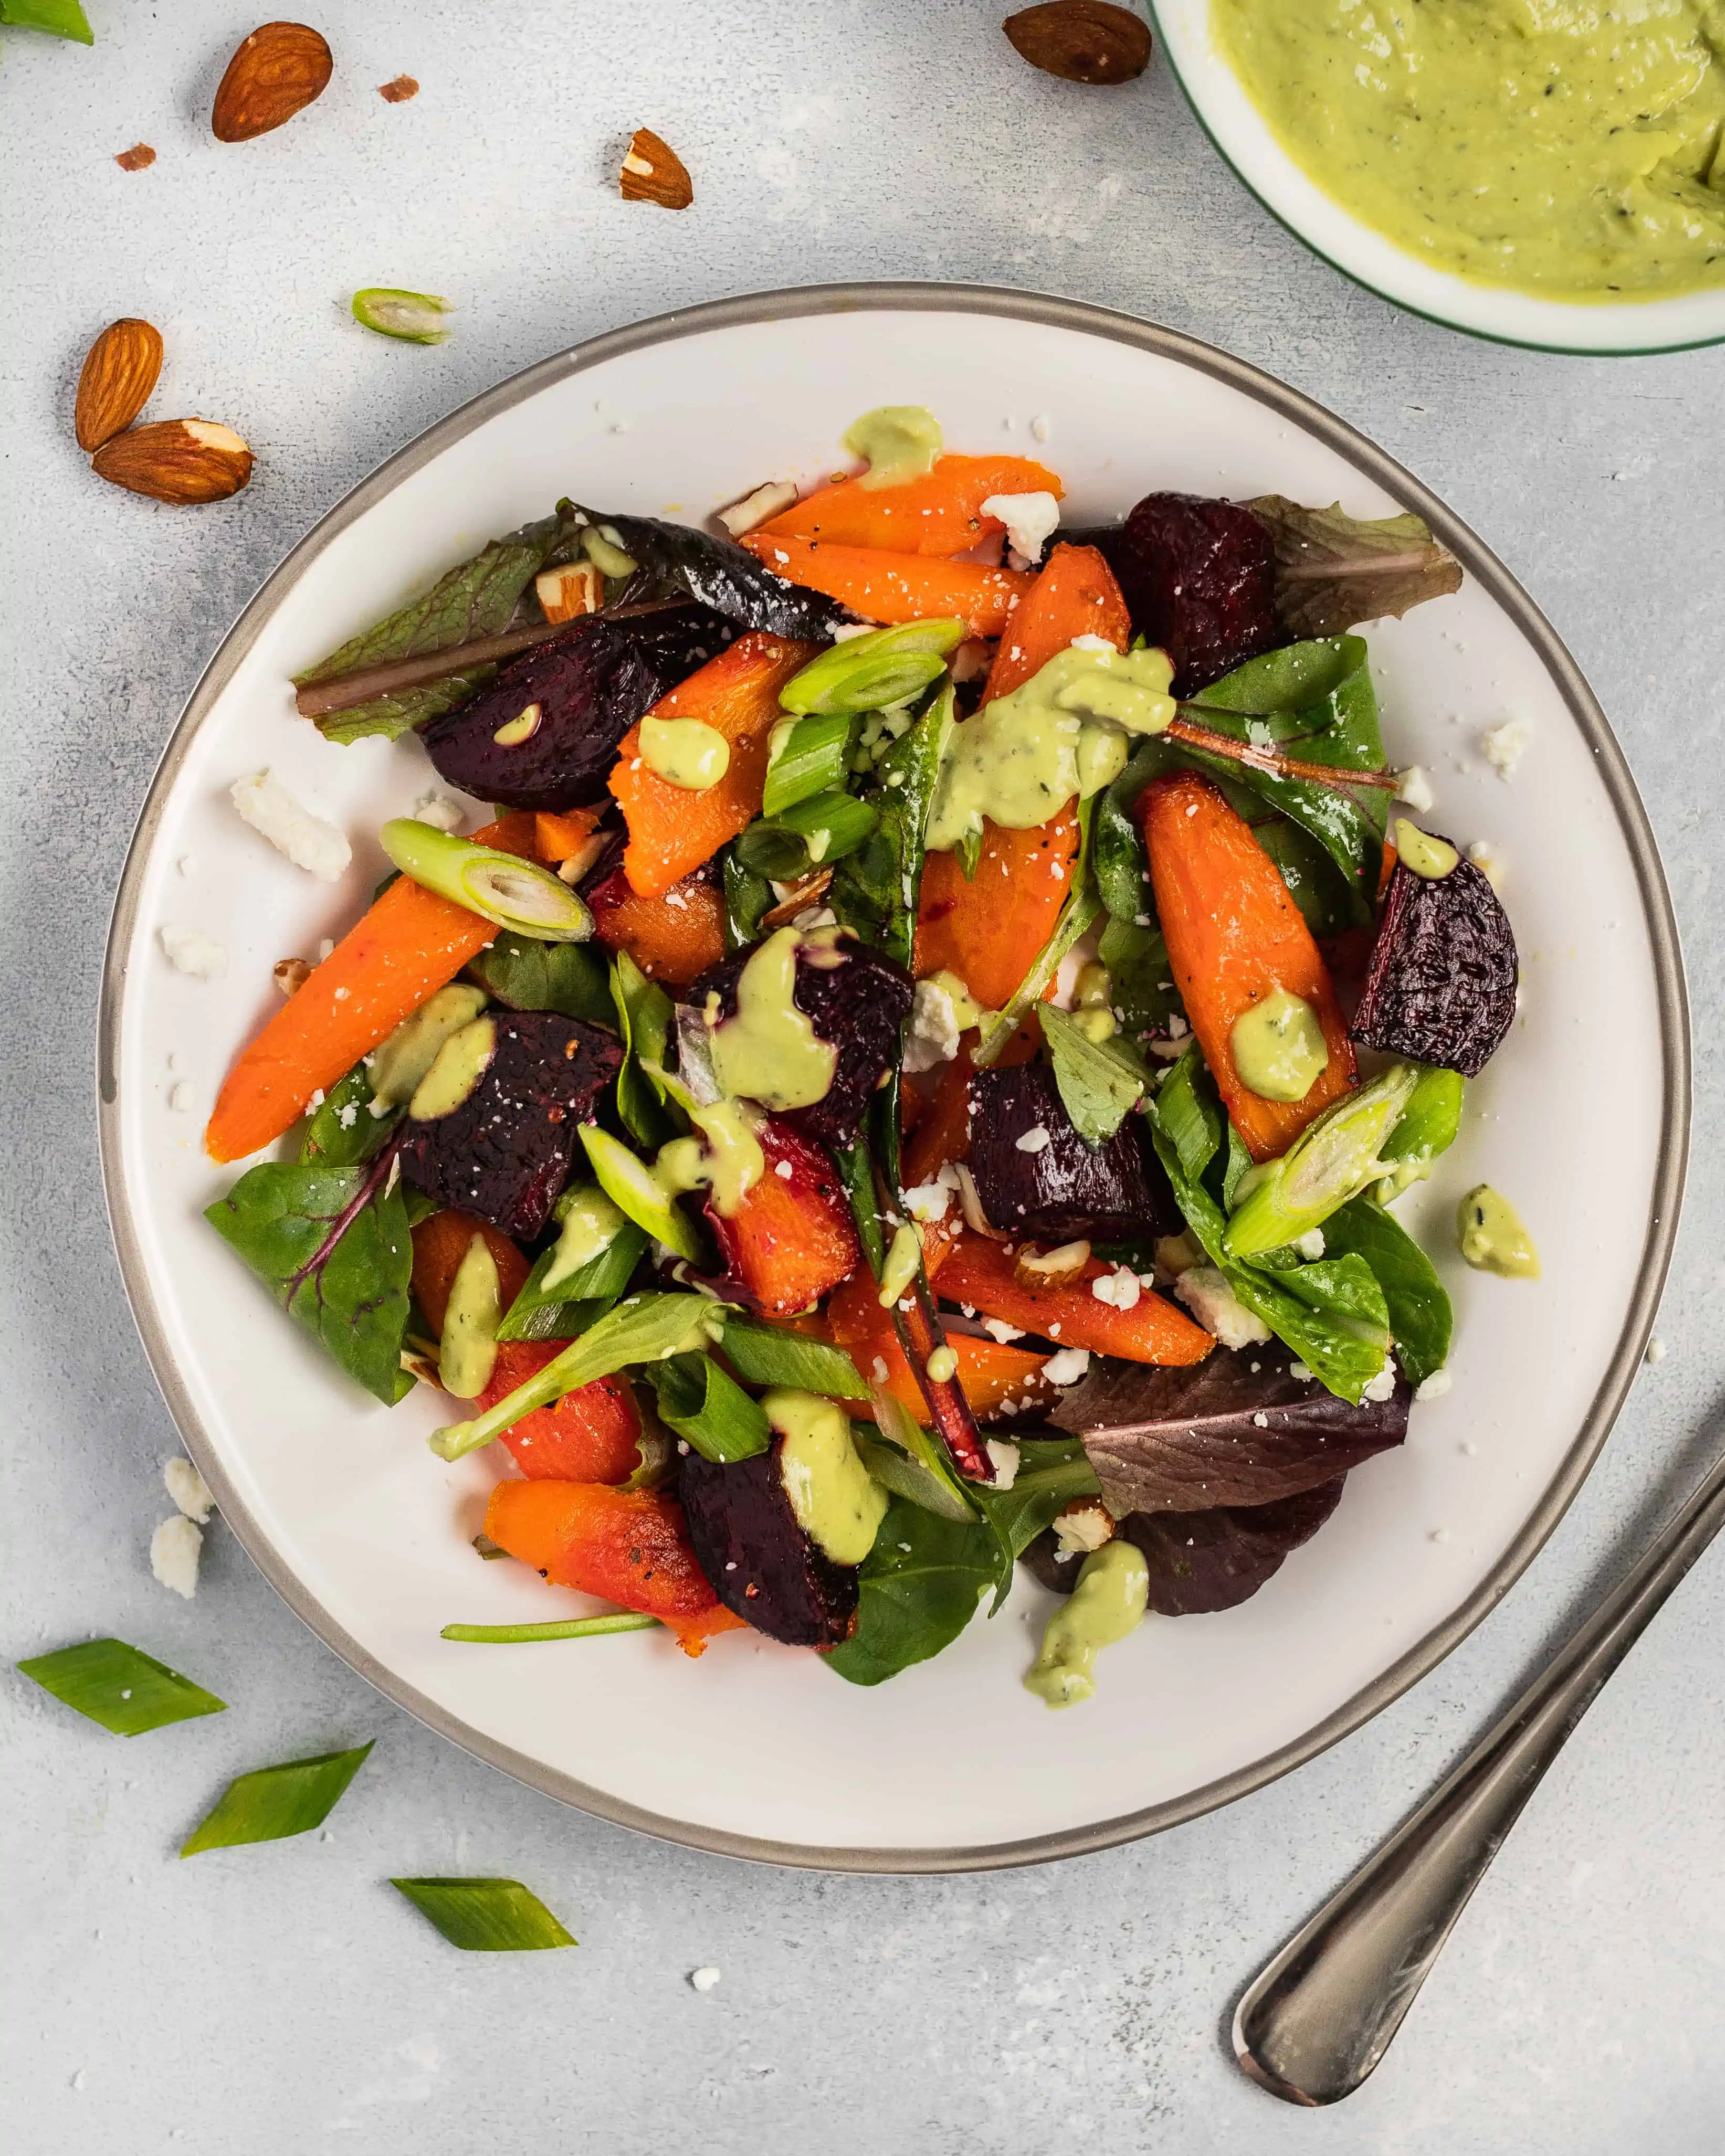 Healthy Winter Salad with Avocado Dressing and Almonds